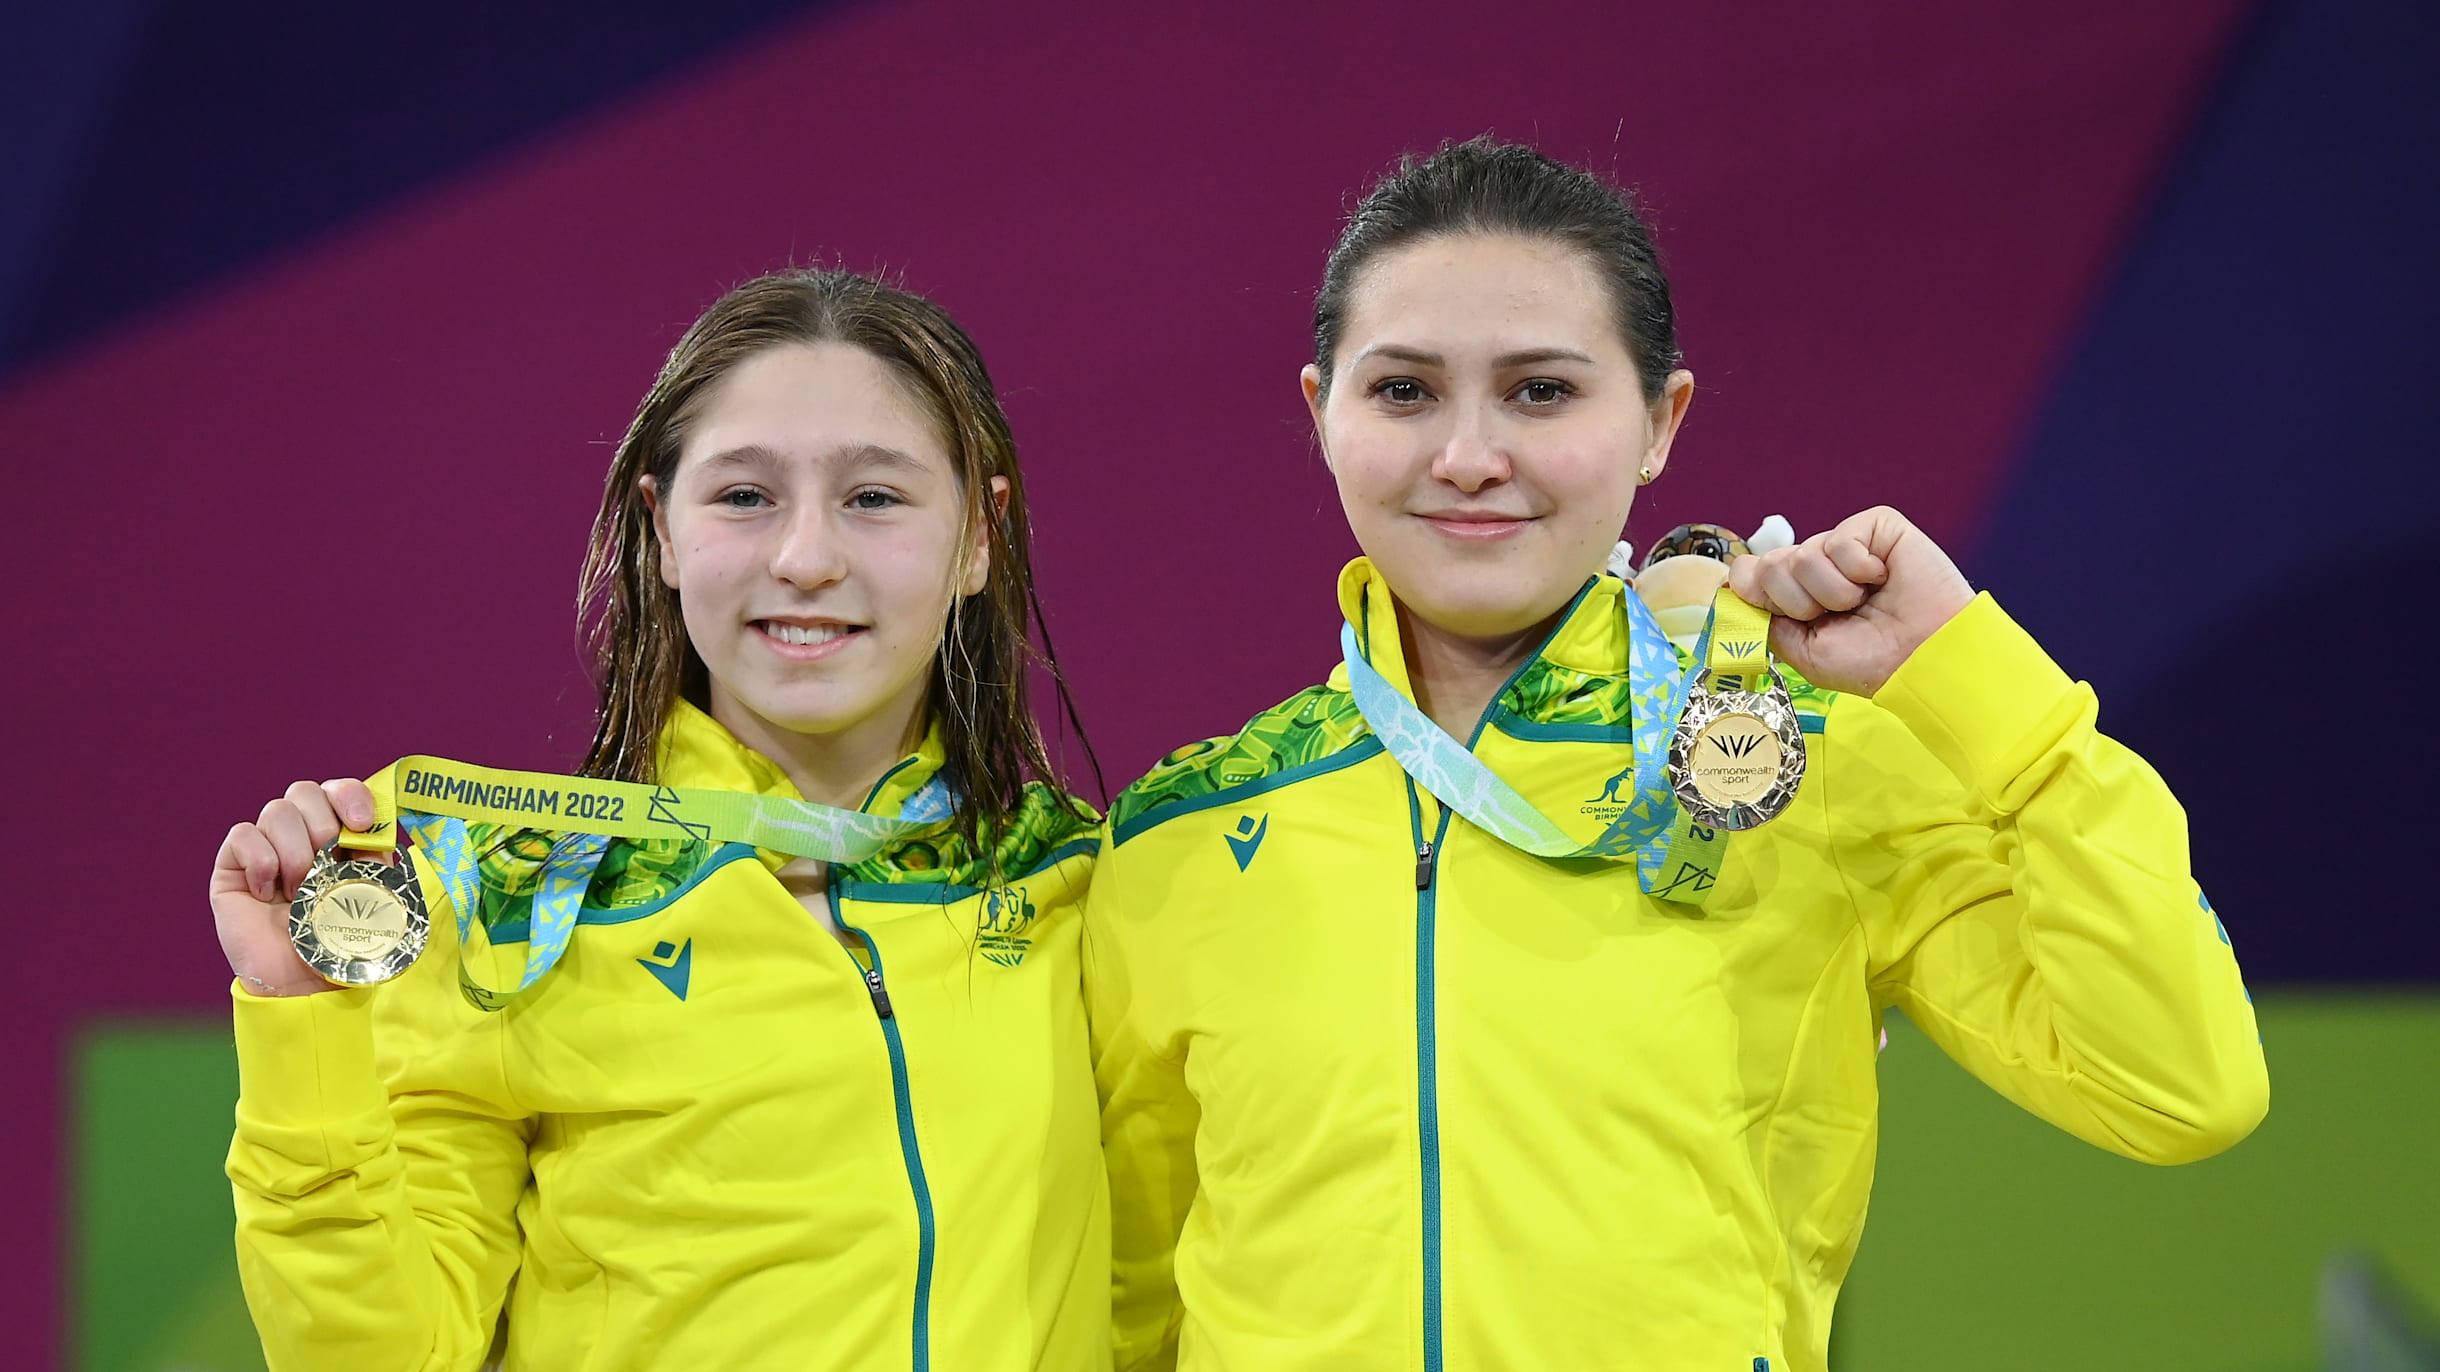 Commonwealth Games 2022 Melissa Wu and Charli Petrov win womens 10m synchronised title